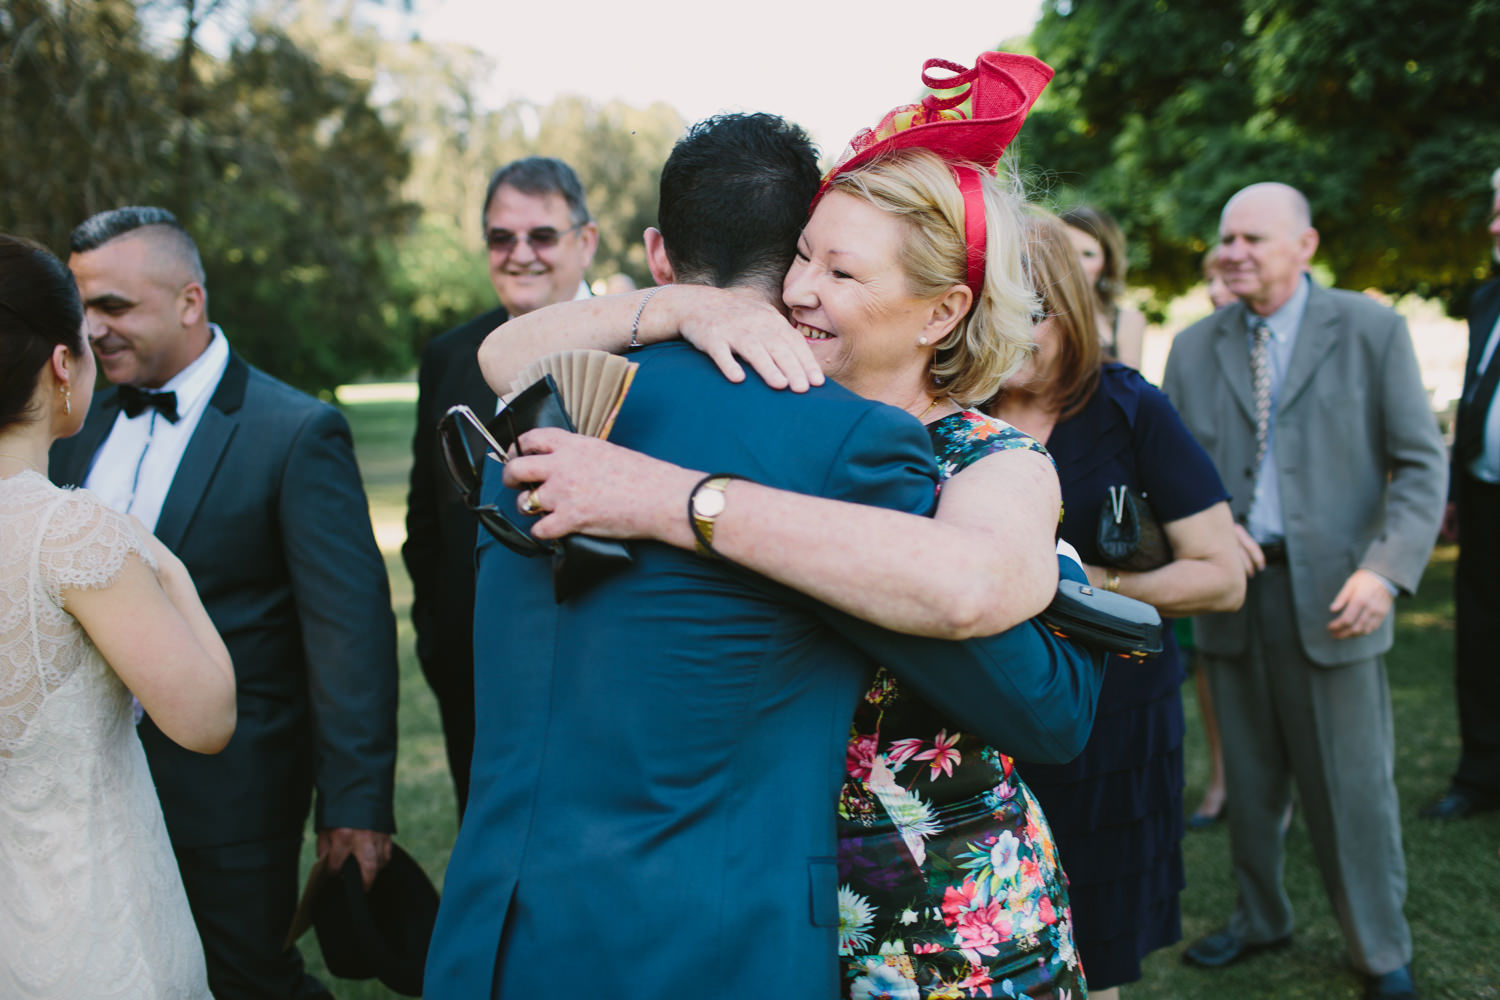 Mother of the groom hugs her son after wedding ceremony